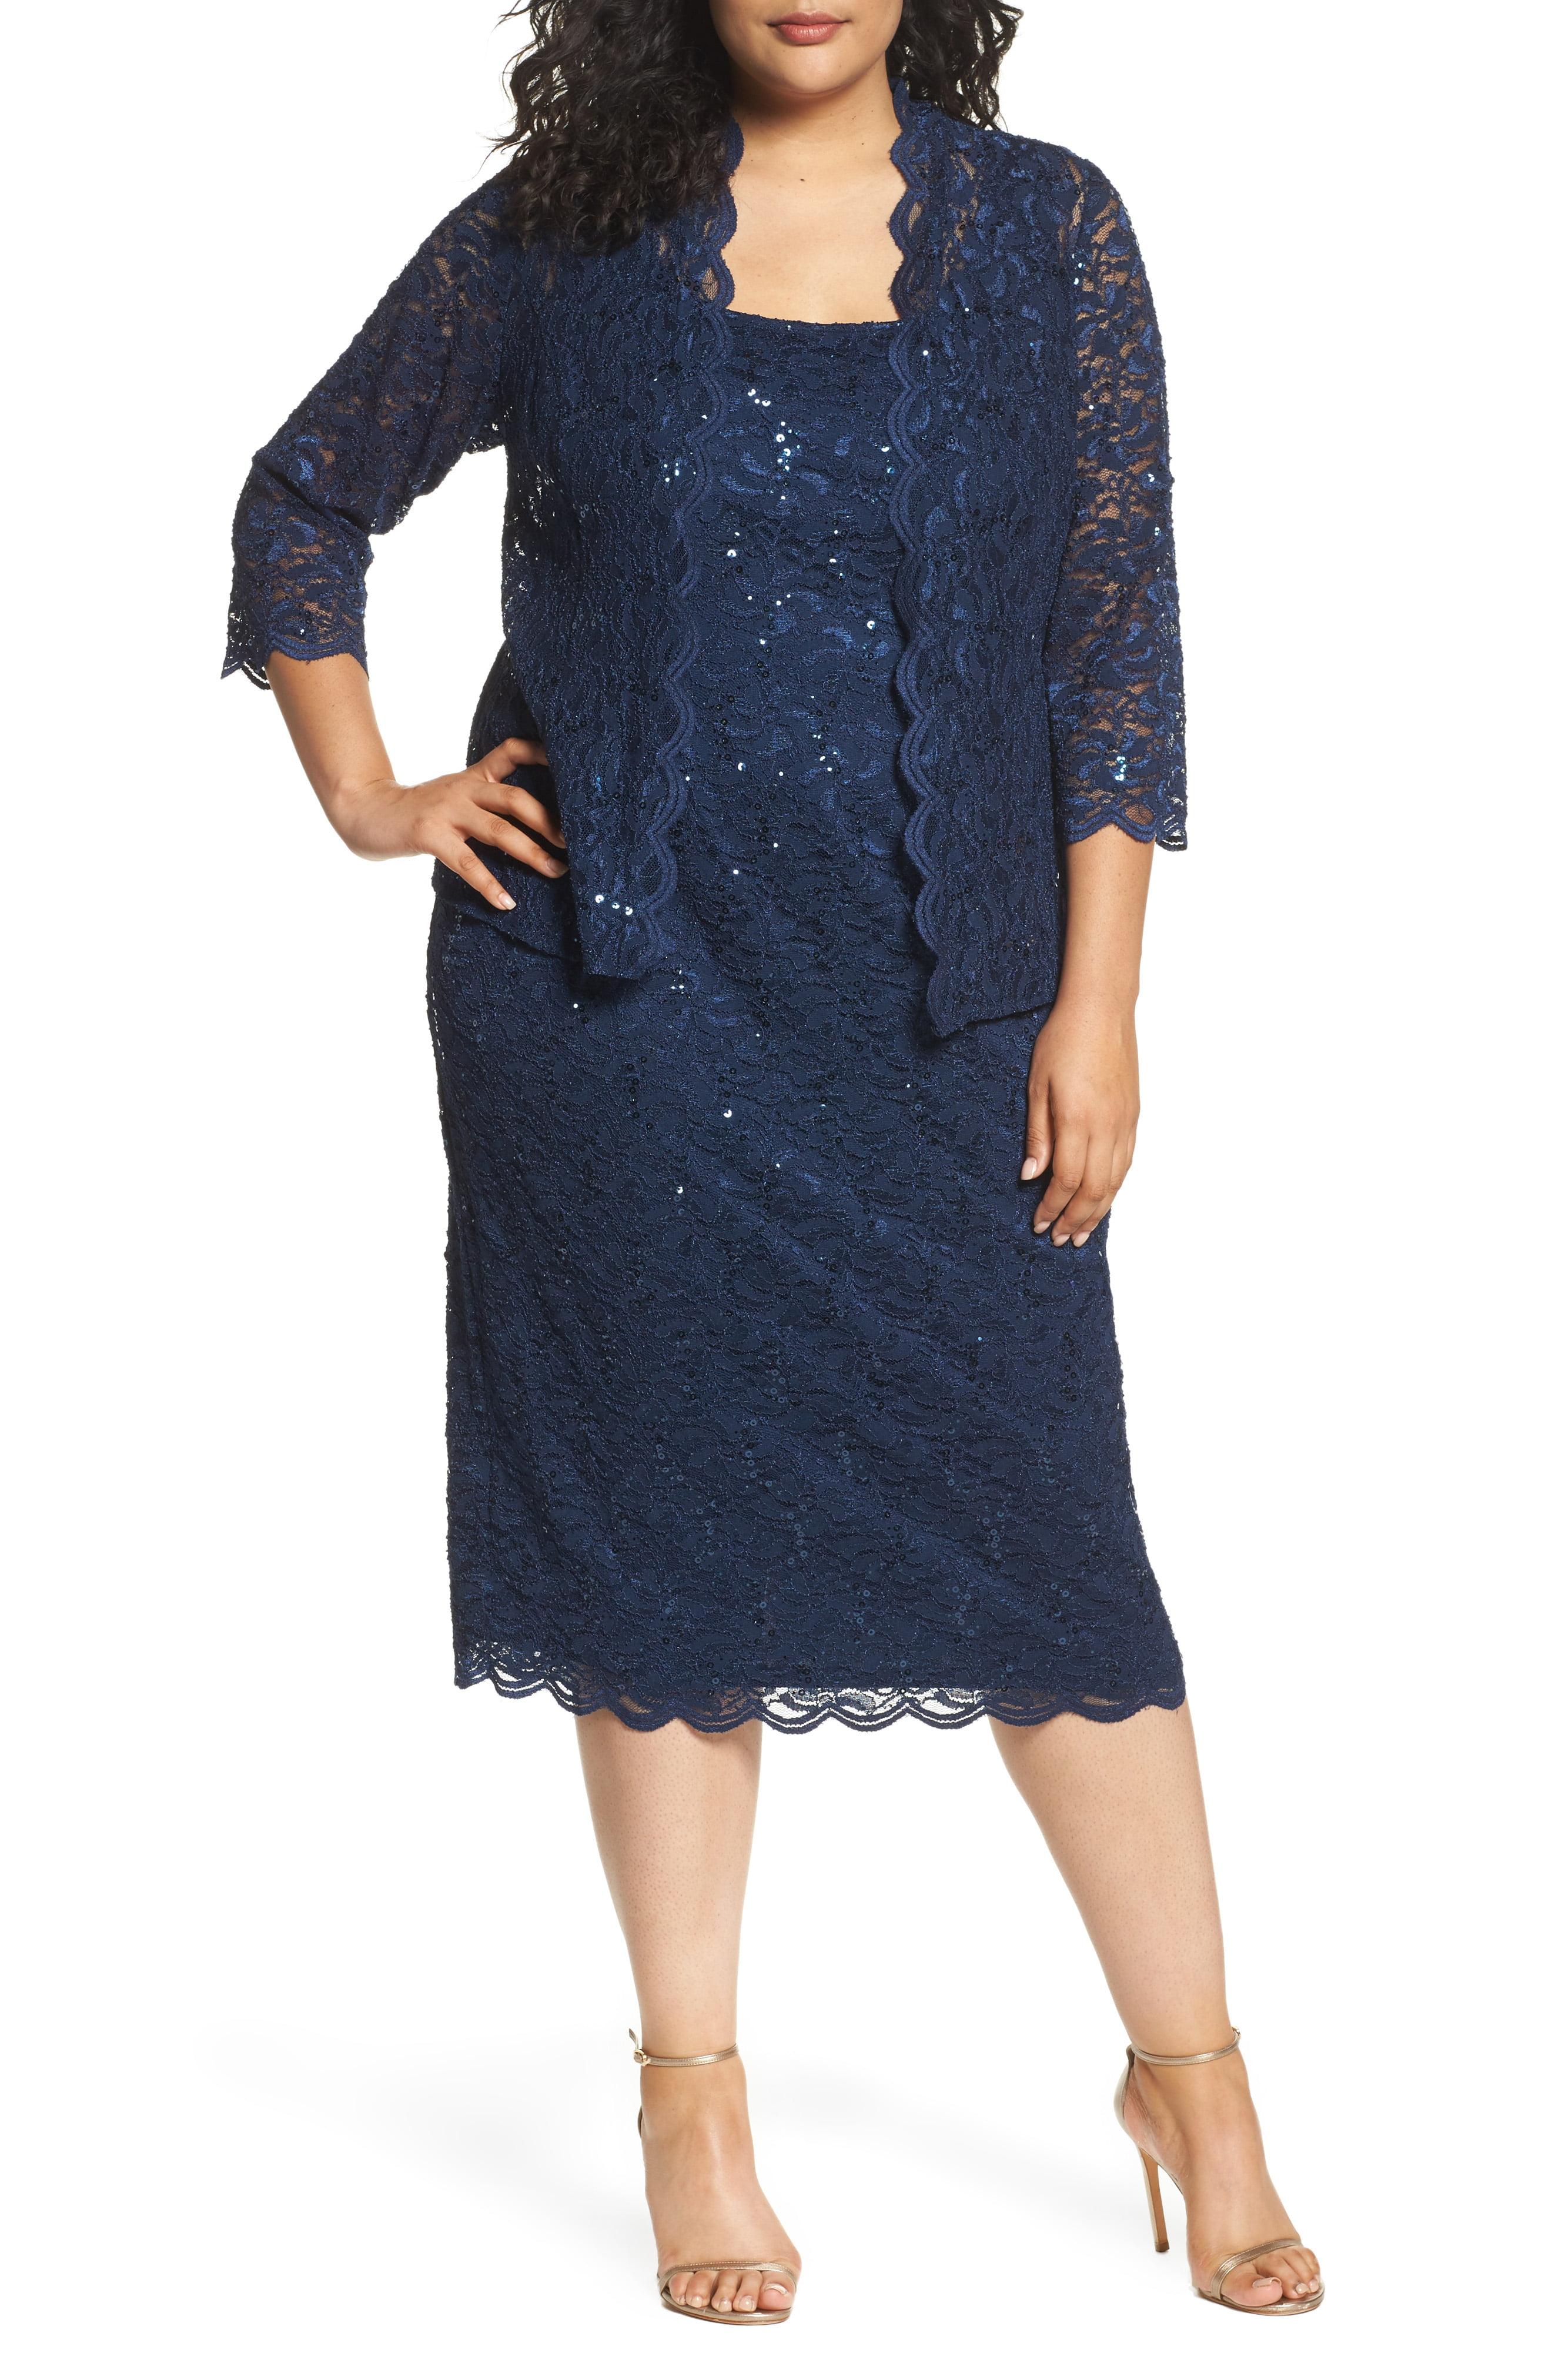 Alex Evenings Lace Cocktail Dress With Jacket in Navy (Blue) - Lyst